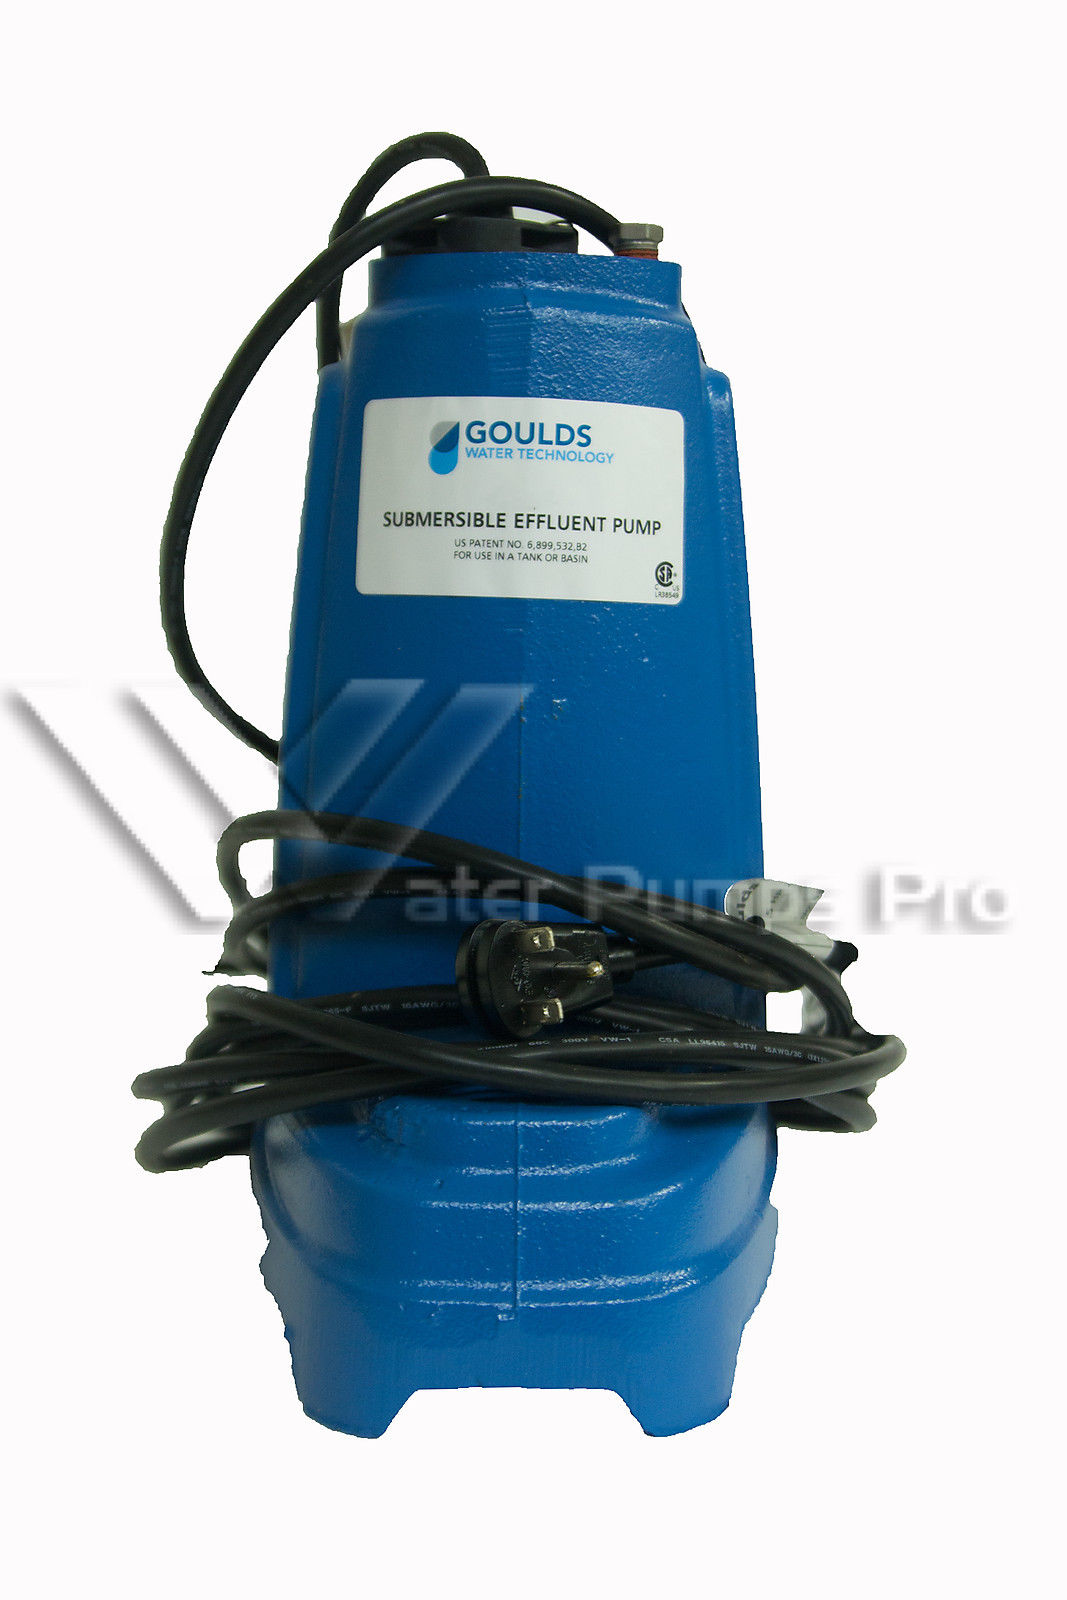 Goulds PE52M 1/2HP, 230V Submersible Effluent Pump - Click Image to Close